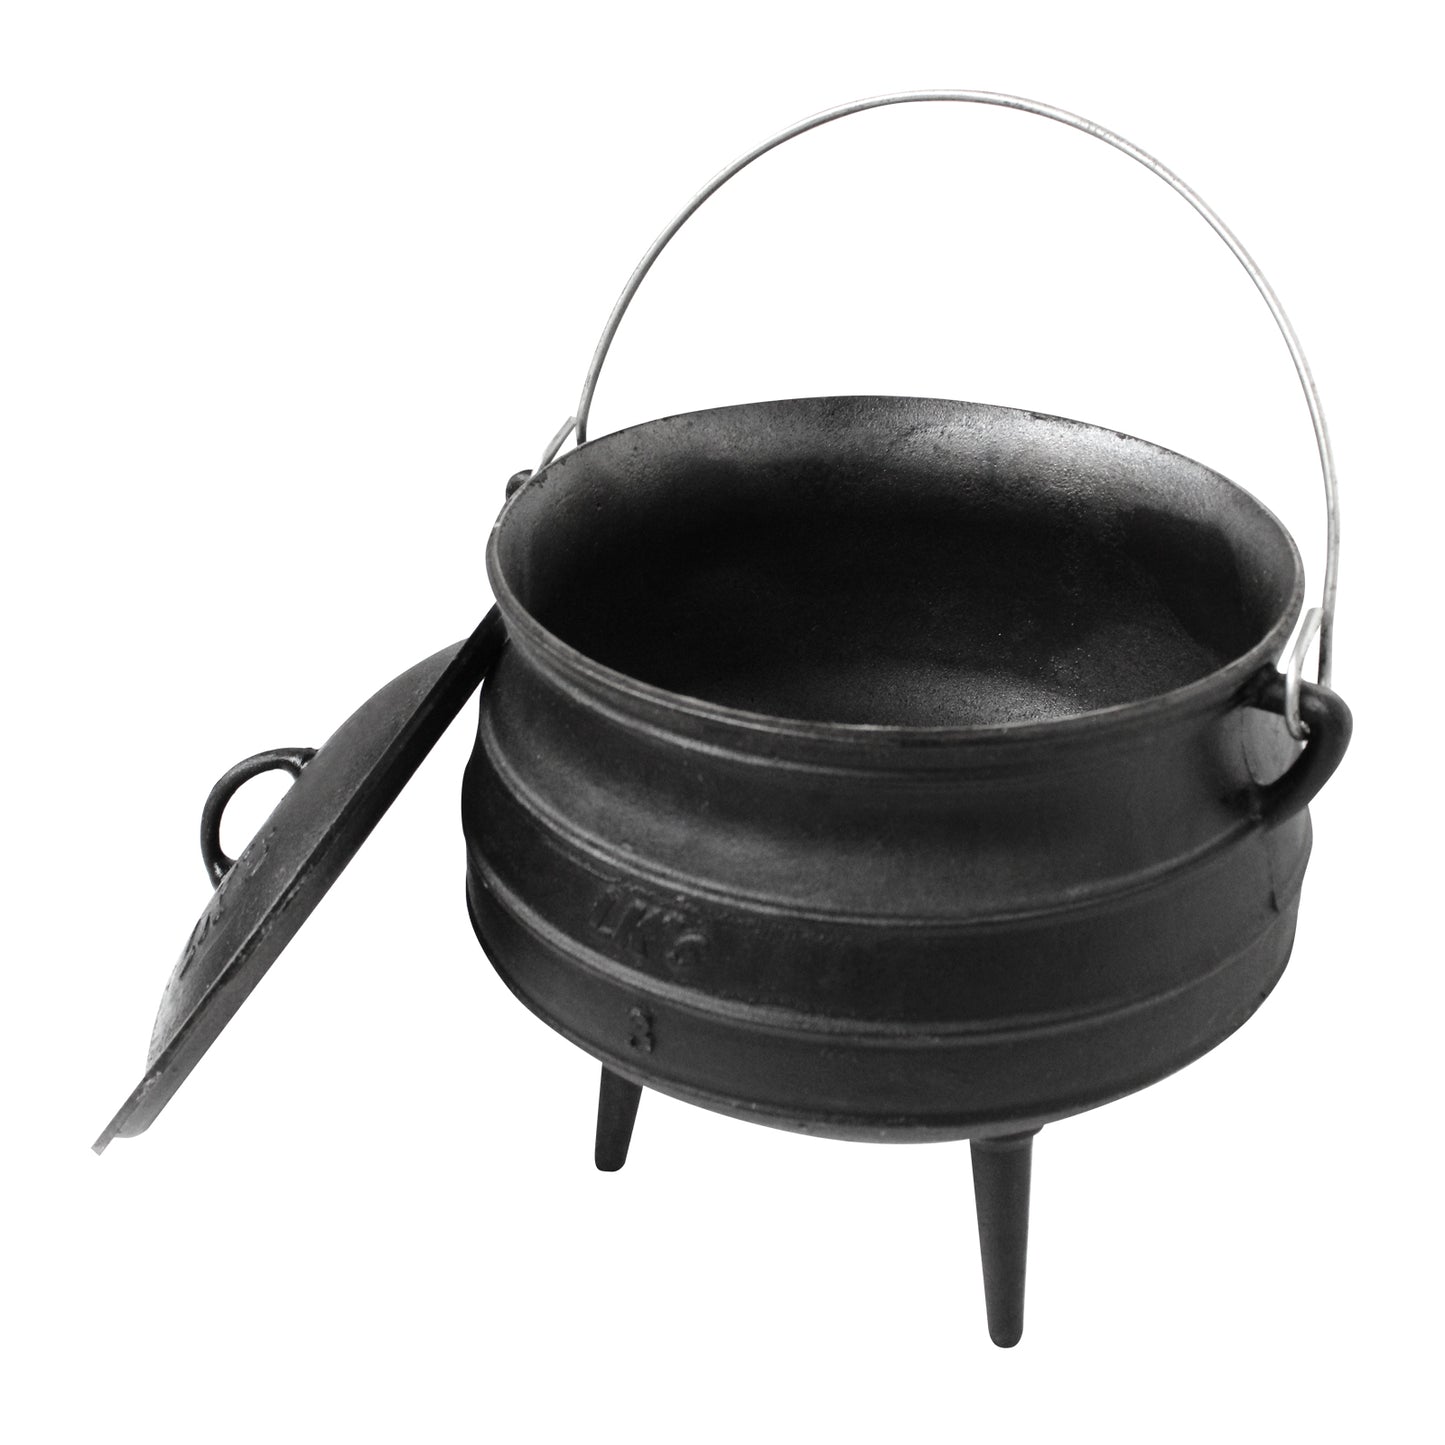 Size 3 Potjie Cooking Pot